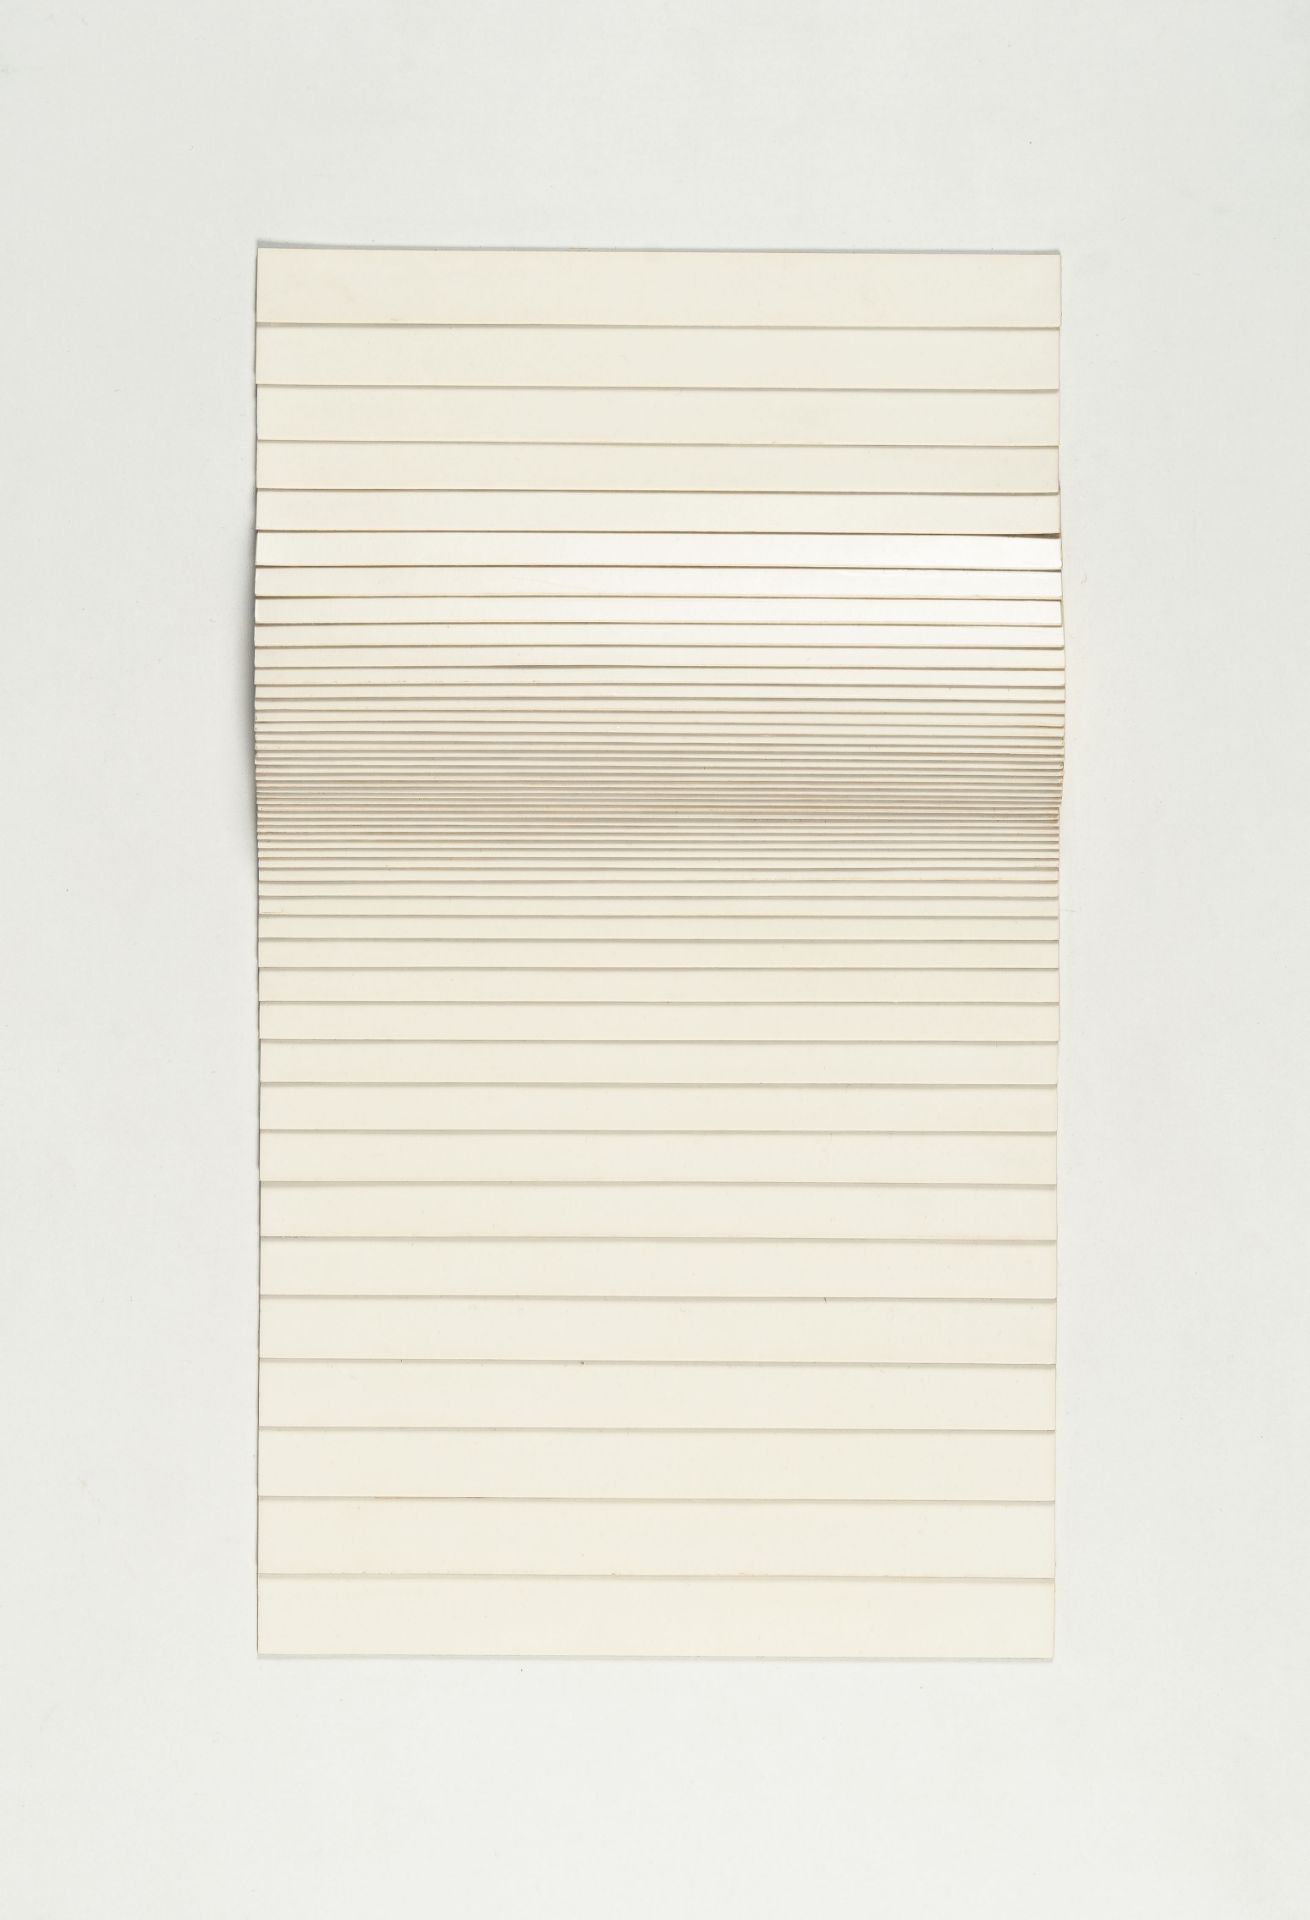 Leo Erb, “No. 27” (Horizontal slat structure).Mixed media with wood and lacquer, laid down on panel.